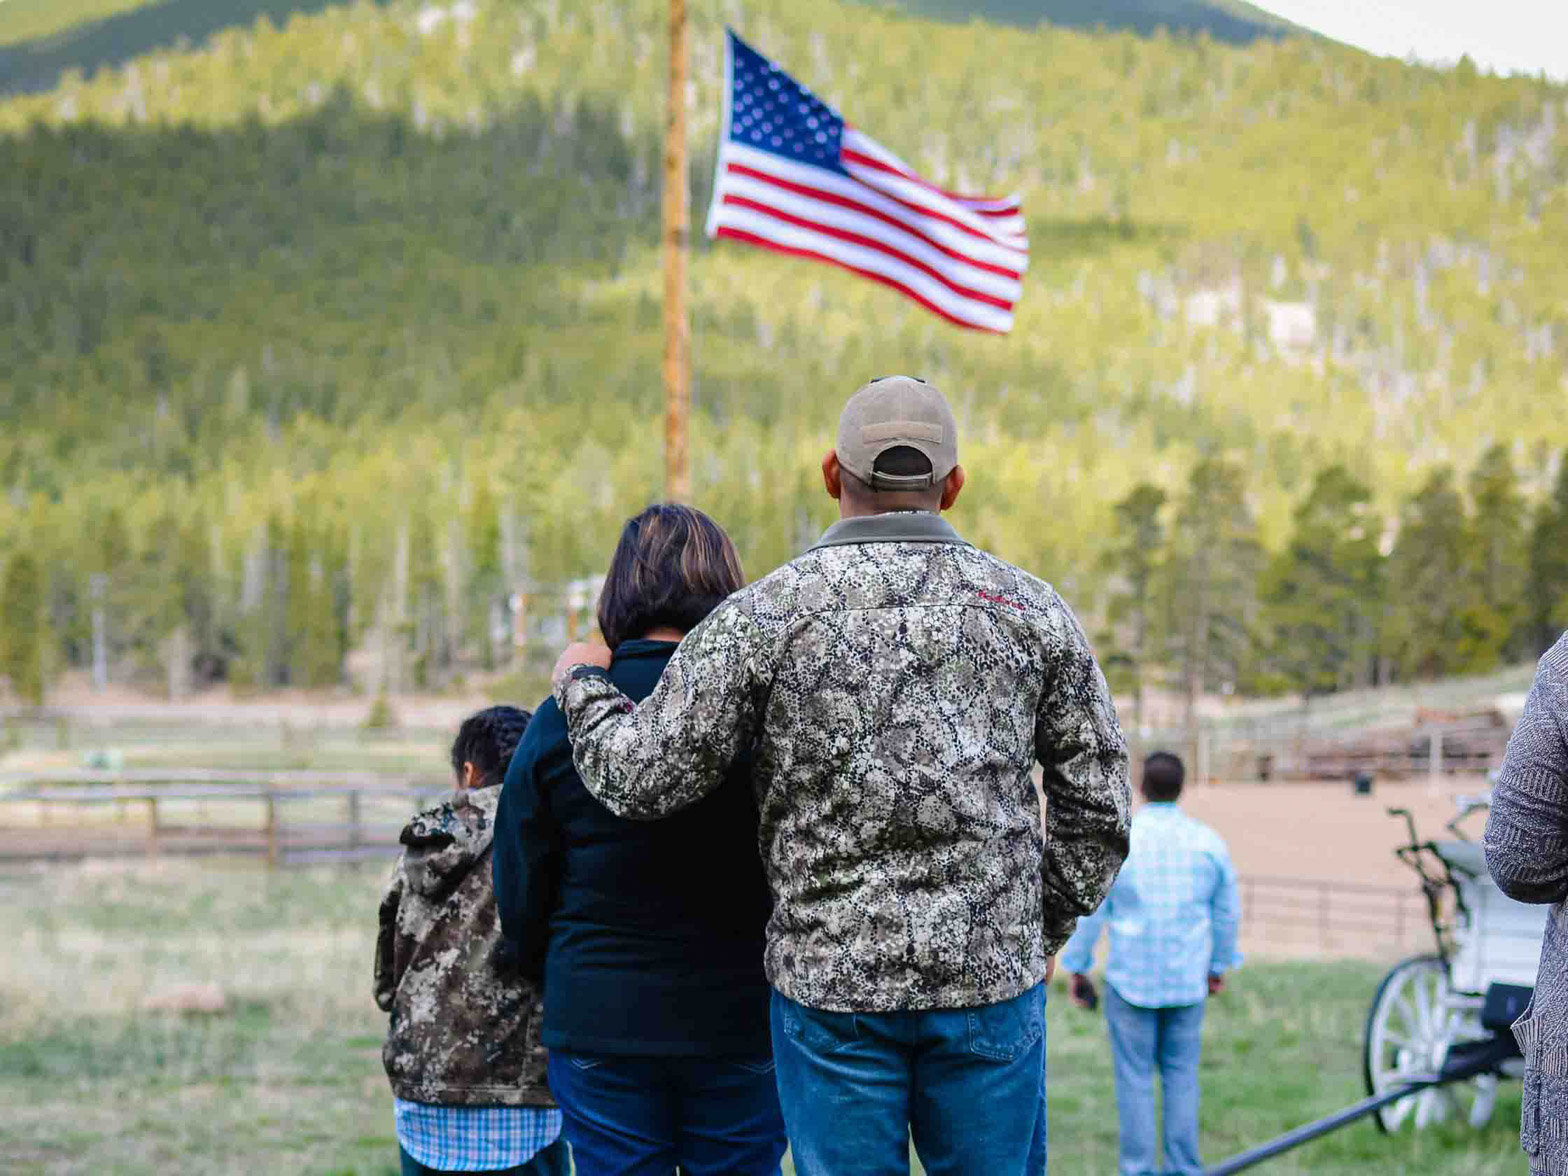 Family starring at the American flag.